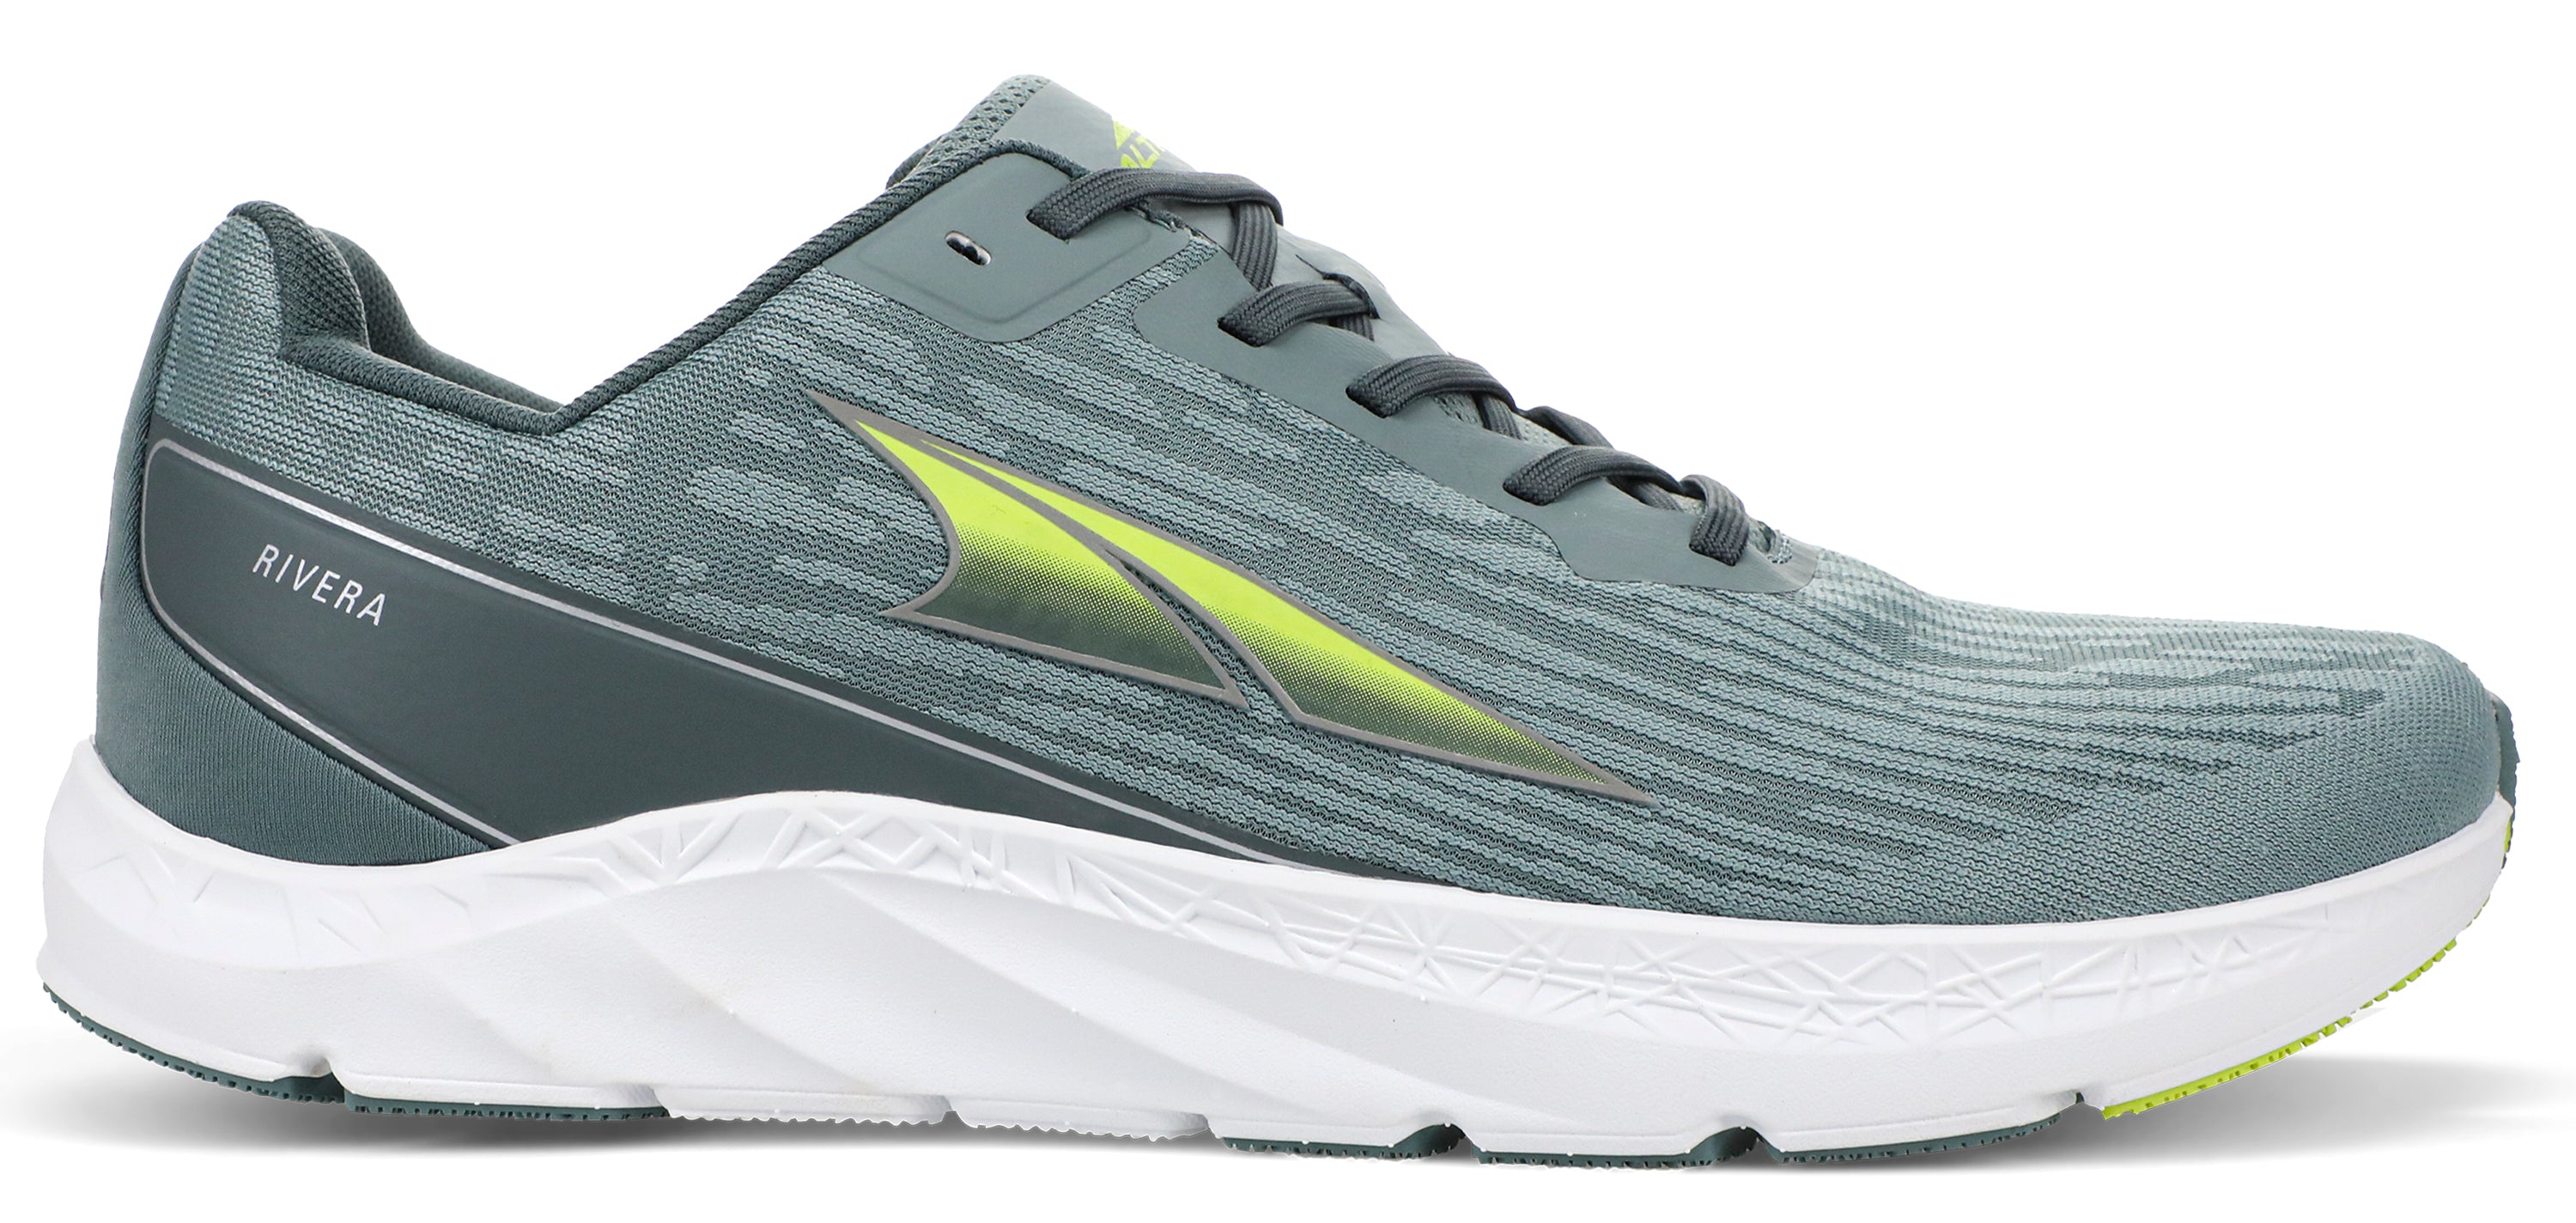 Altra Men's Rivera Road Running Shoe in Green from the side